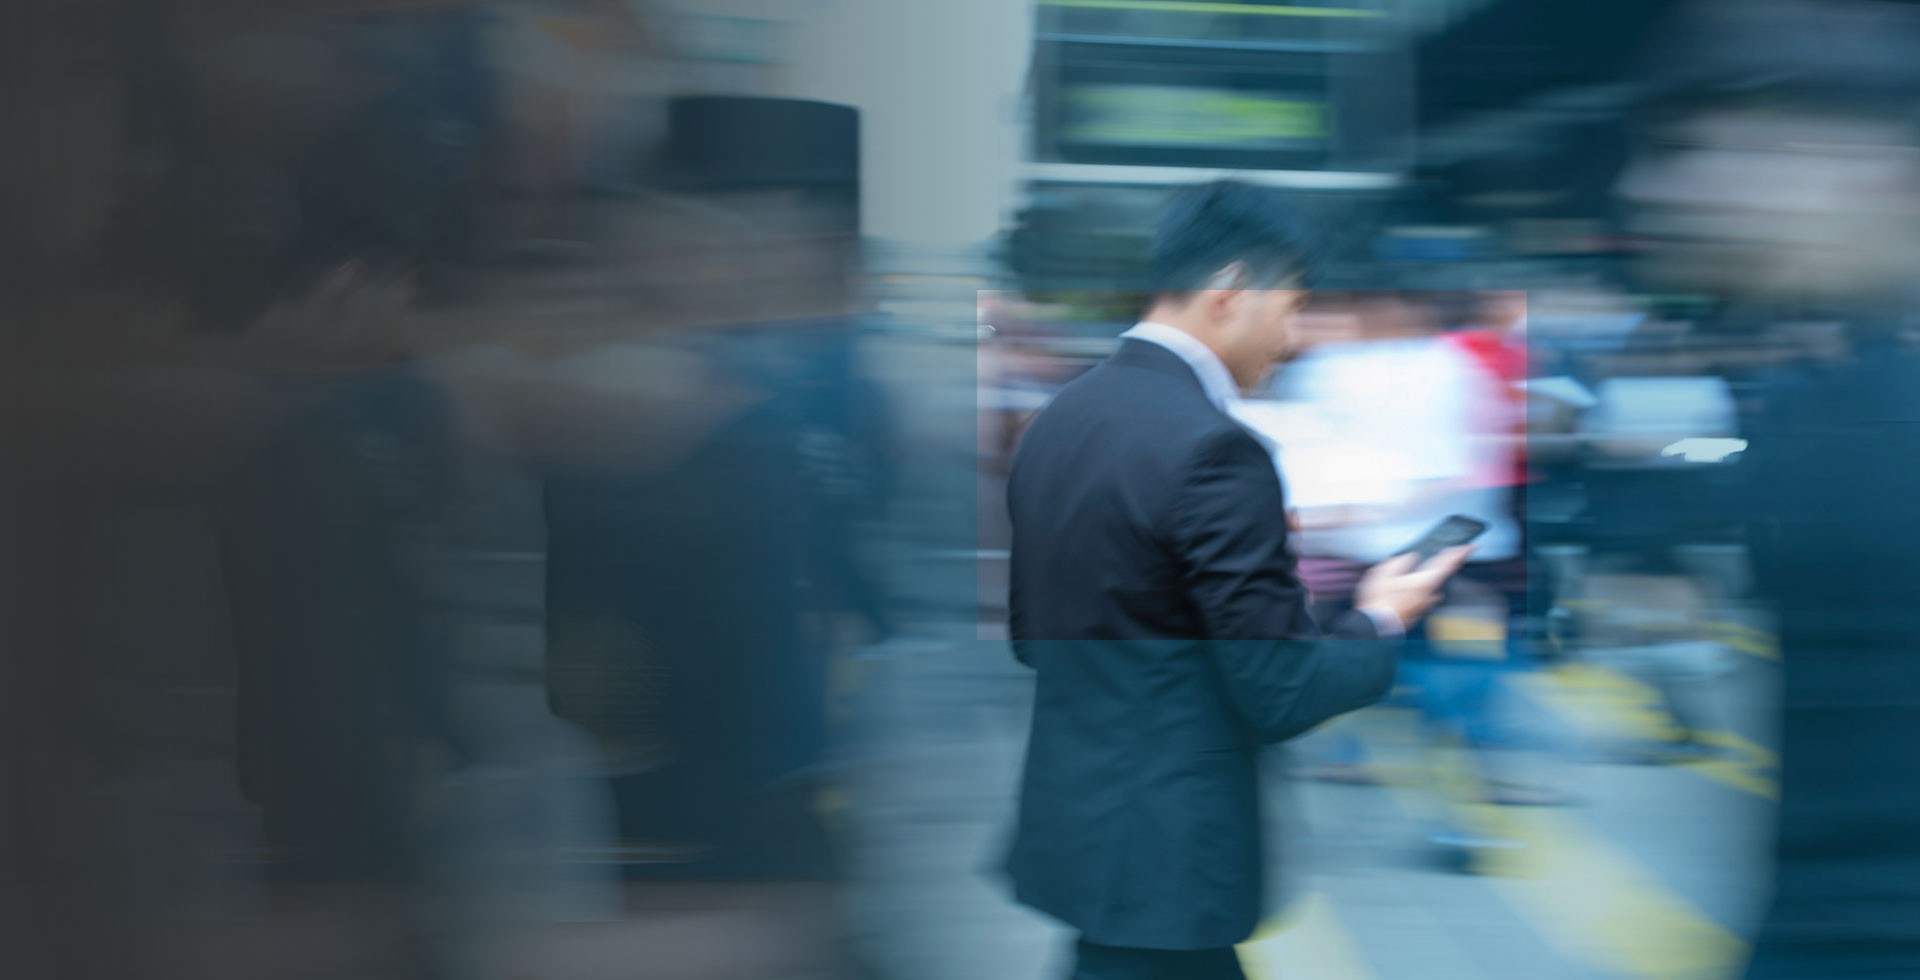 BussinesMan with mobile device in city centre with blurred backround ACTIVE